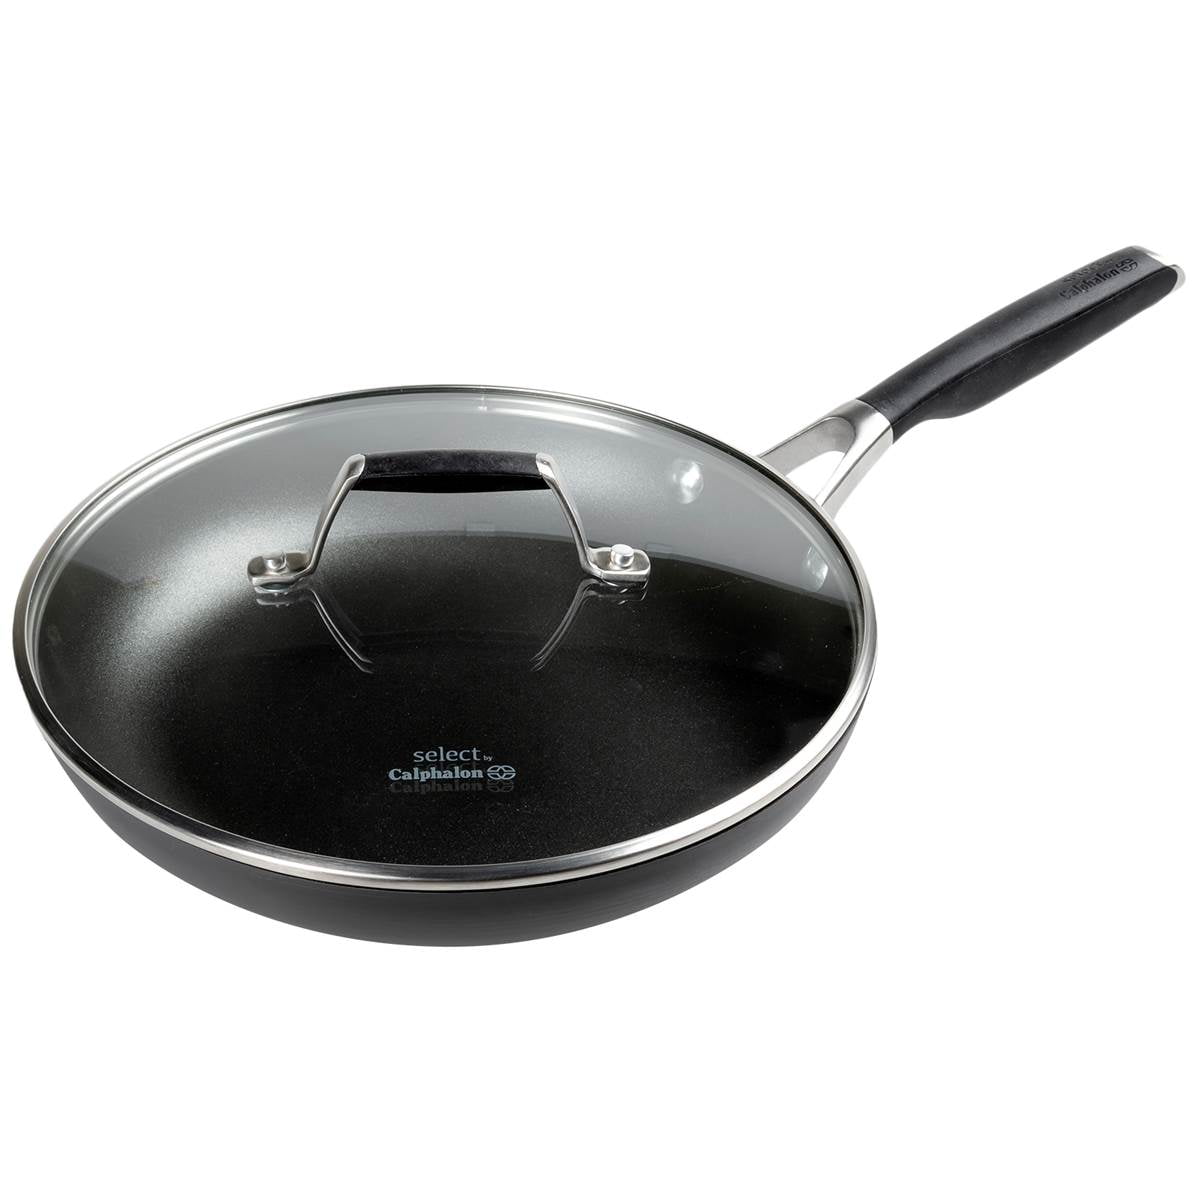 Details about   Nonstick Saute Pan 3 Quart Deep Frying with Lid Granite Stone Coating 9.5 Inch 